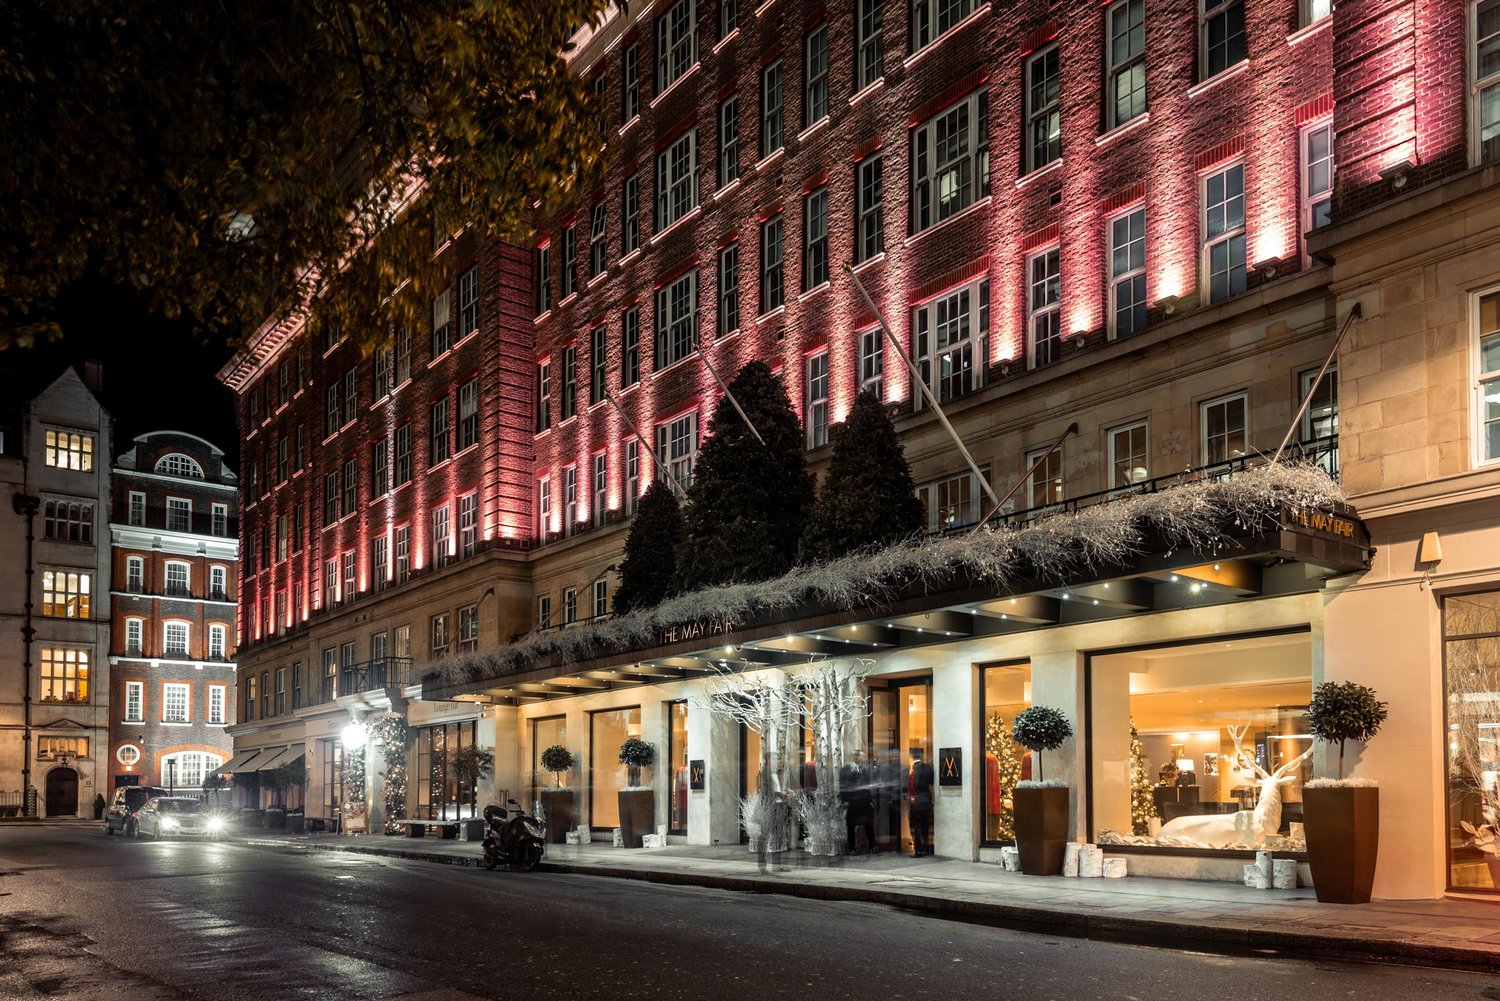 The May Fair Hotel: A Traditional Hotel in the heart of London